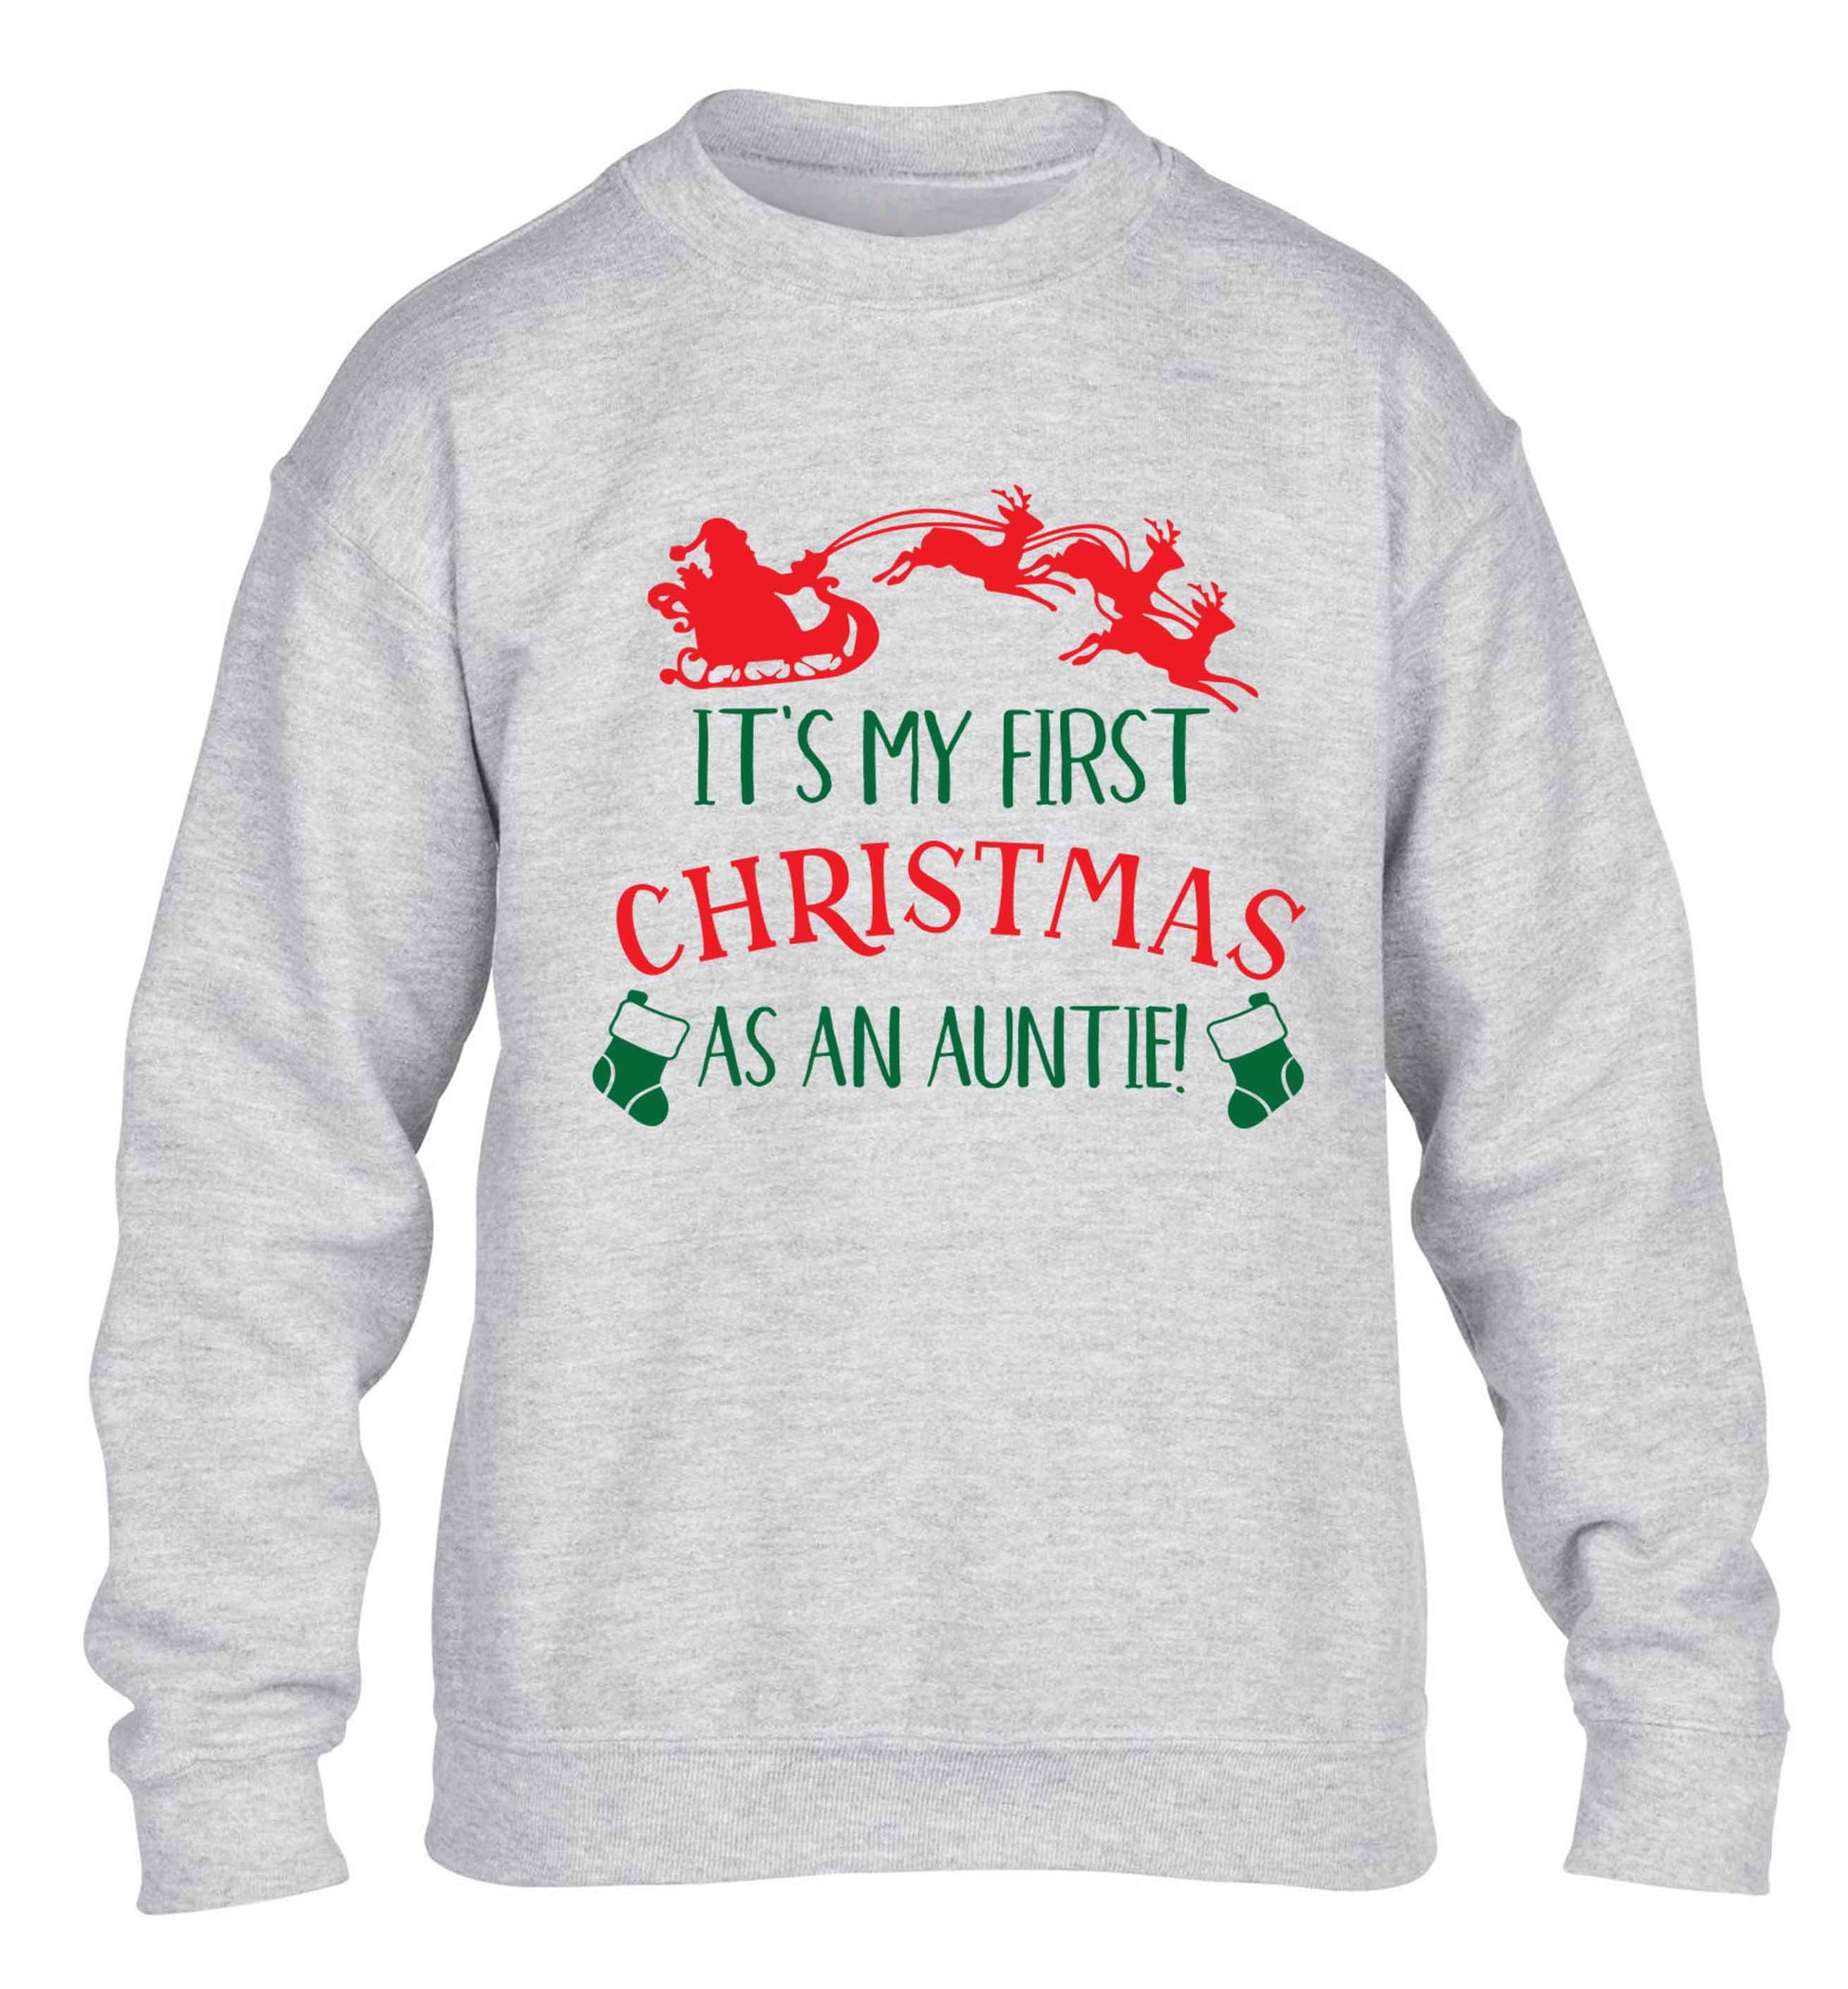 It's my first Christmas as an auntie! children's grey sweater 12-13 Years